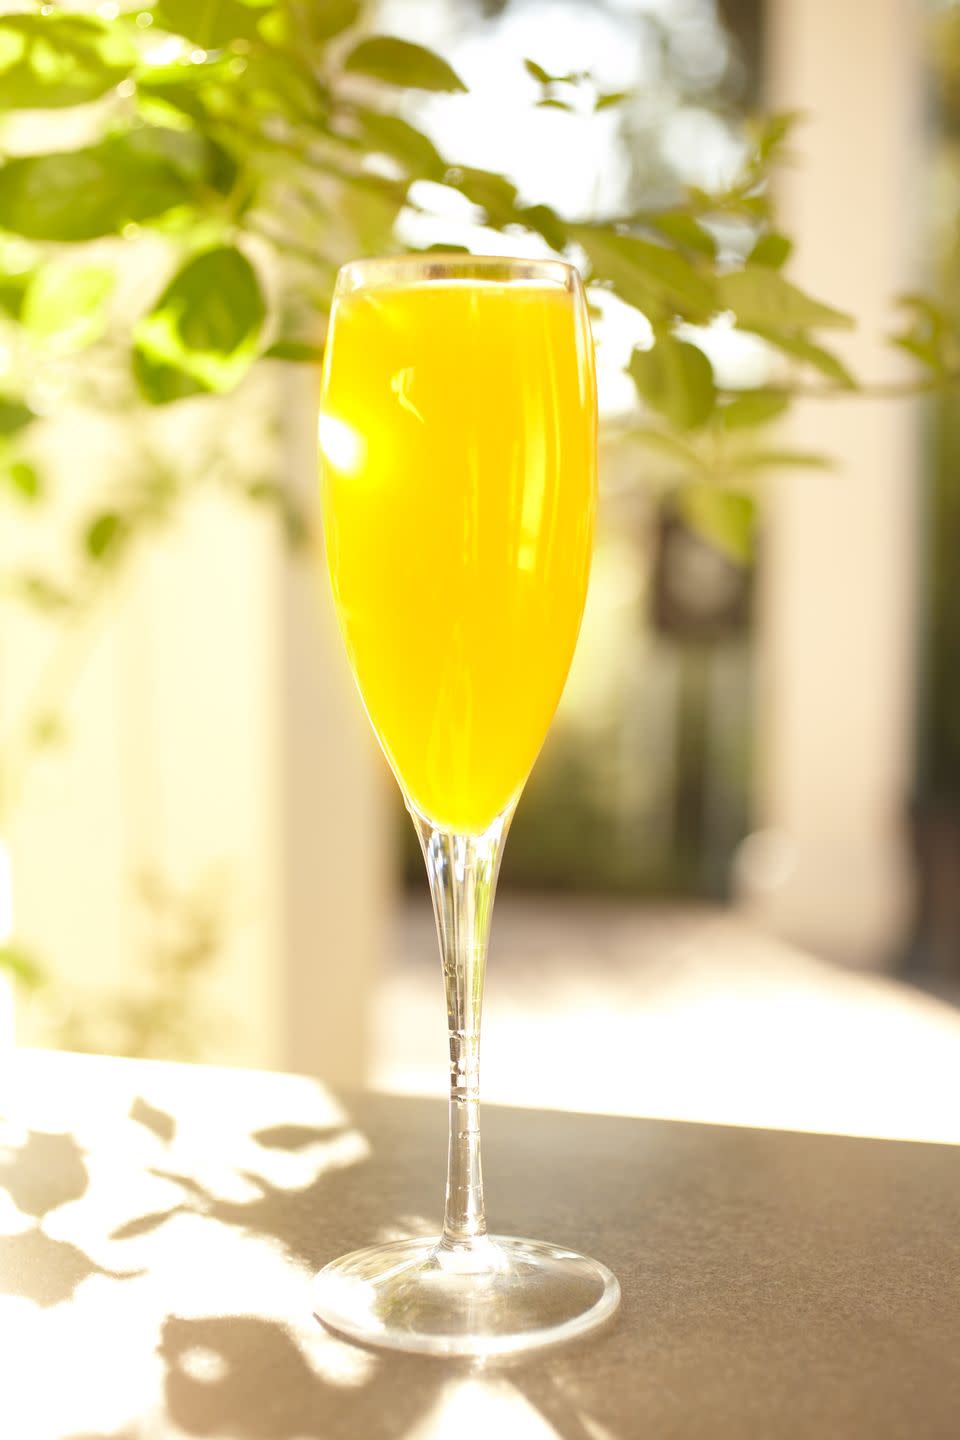 WITH YOUR MOM: Get tipsy at a mimosa brunch.